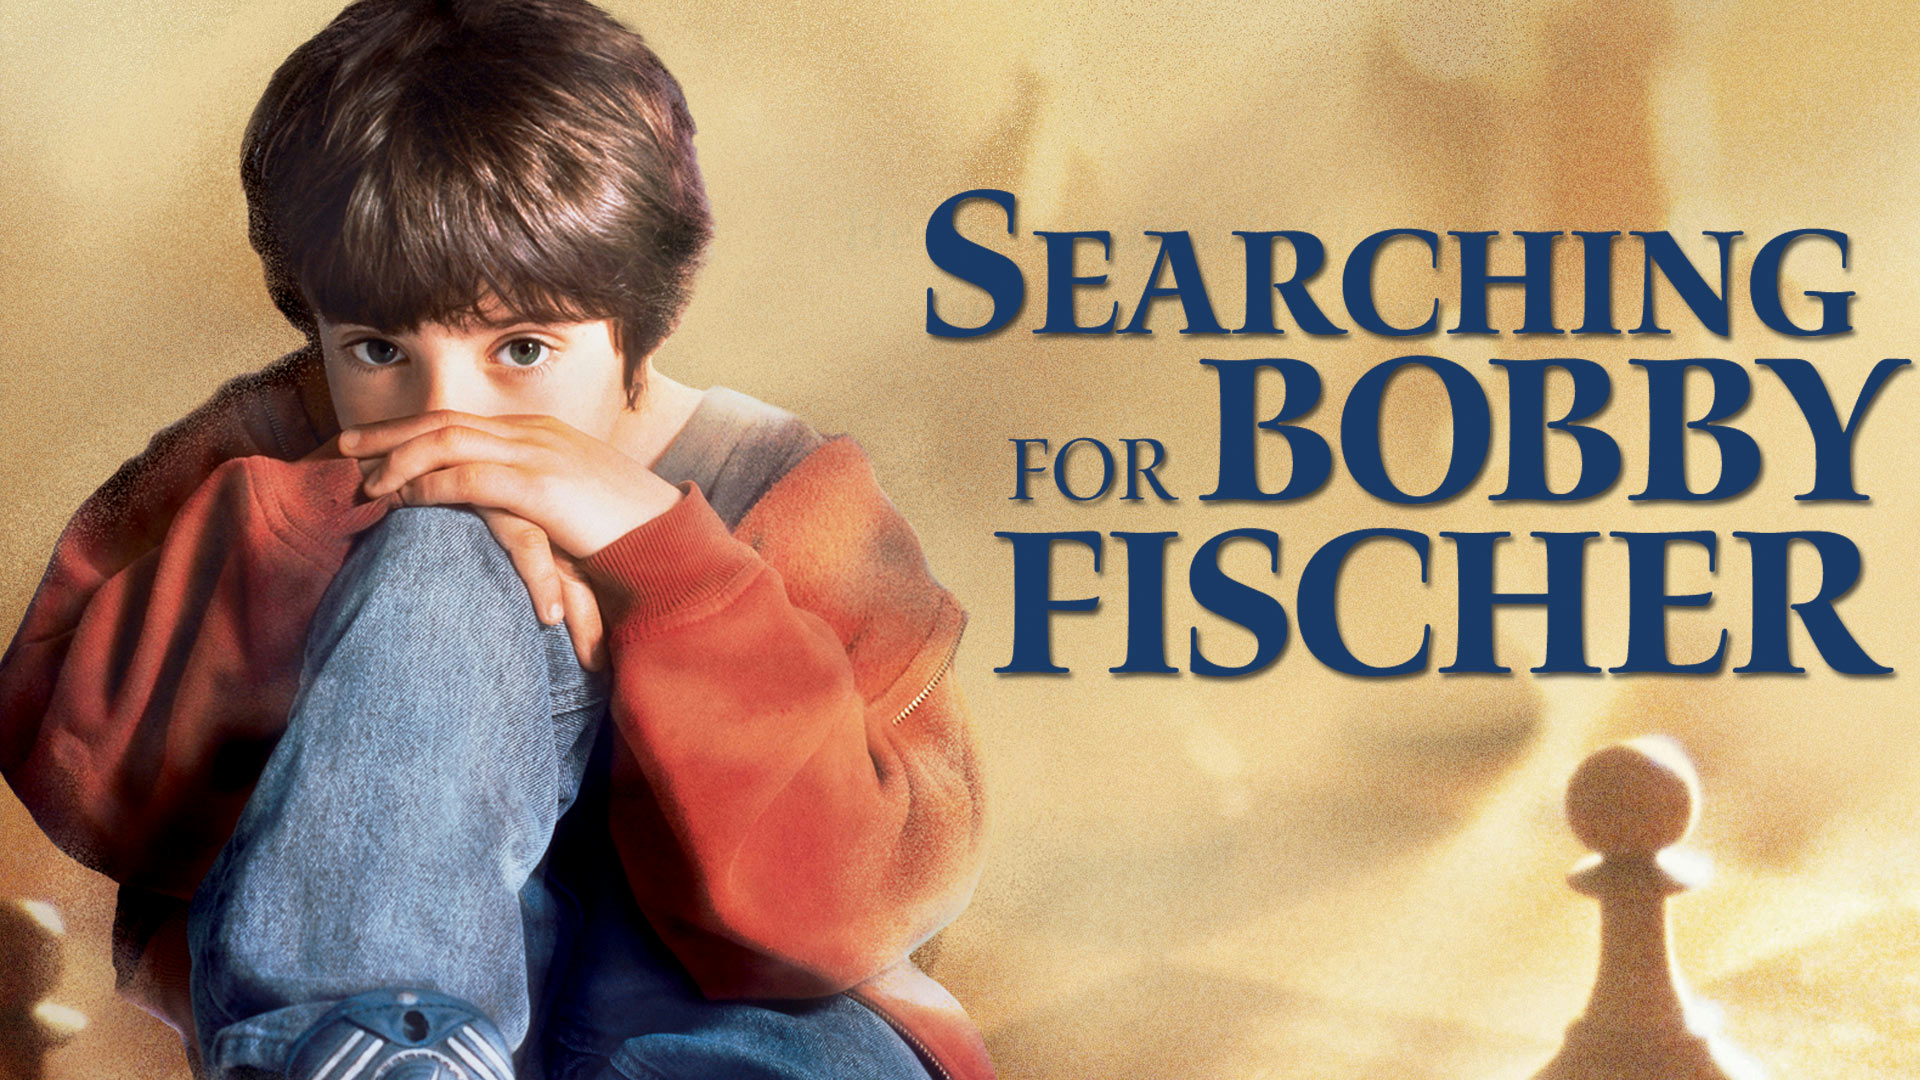 In Searching for Bobby Fischer (1993), the movie is actually about